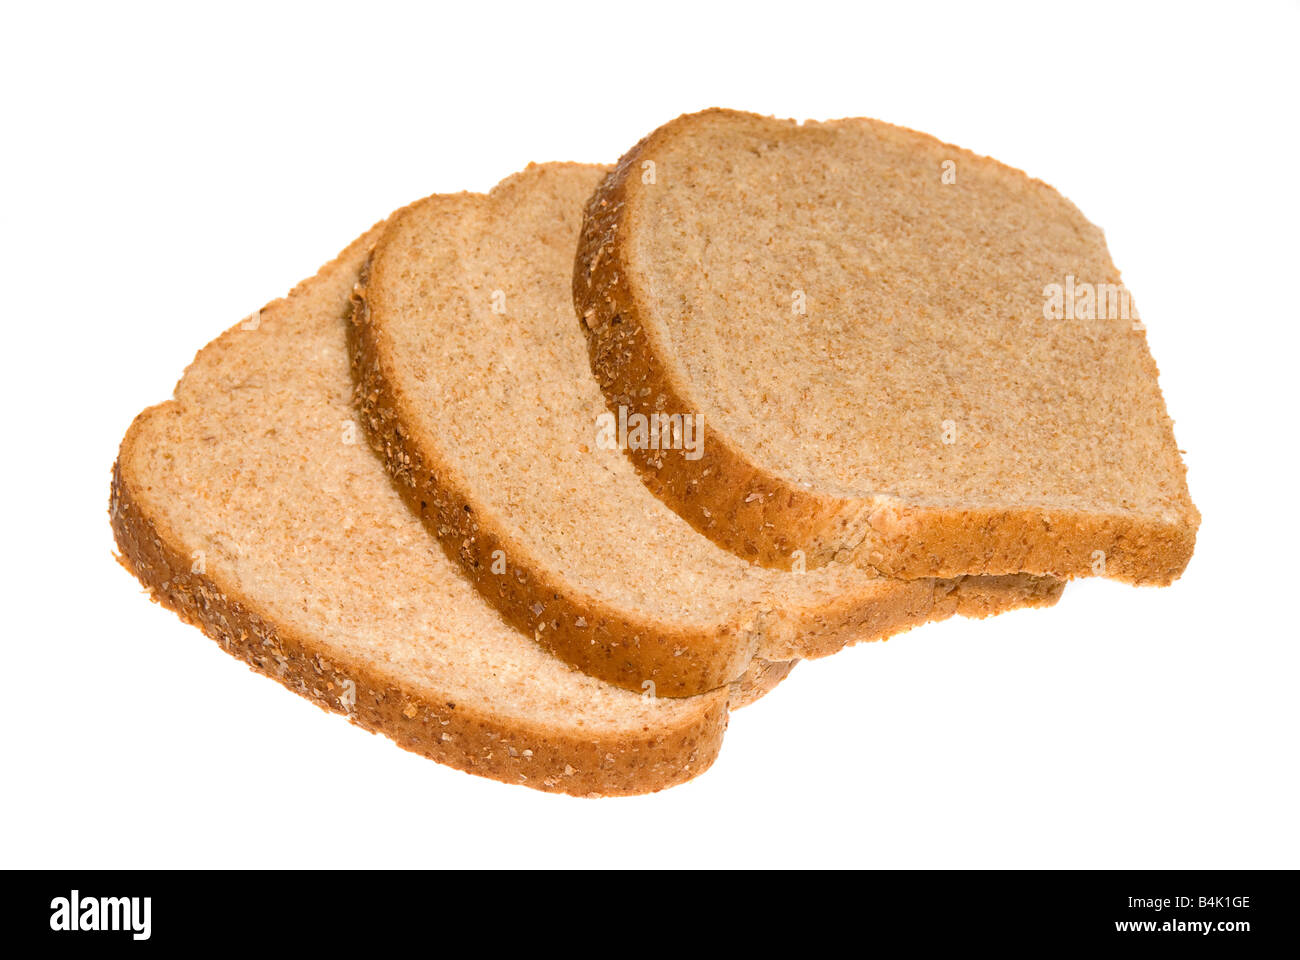 Three slices of whole cracked wheat bread isolated on white Stock Photo